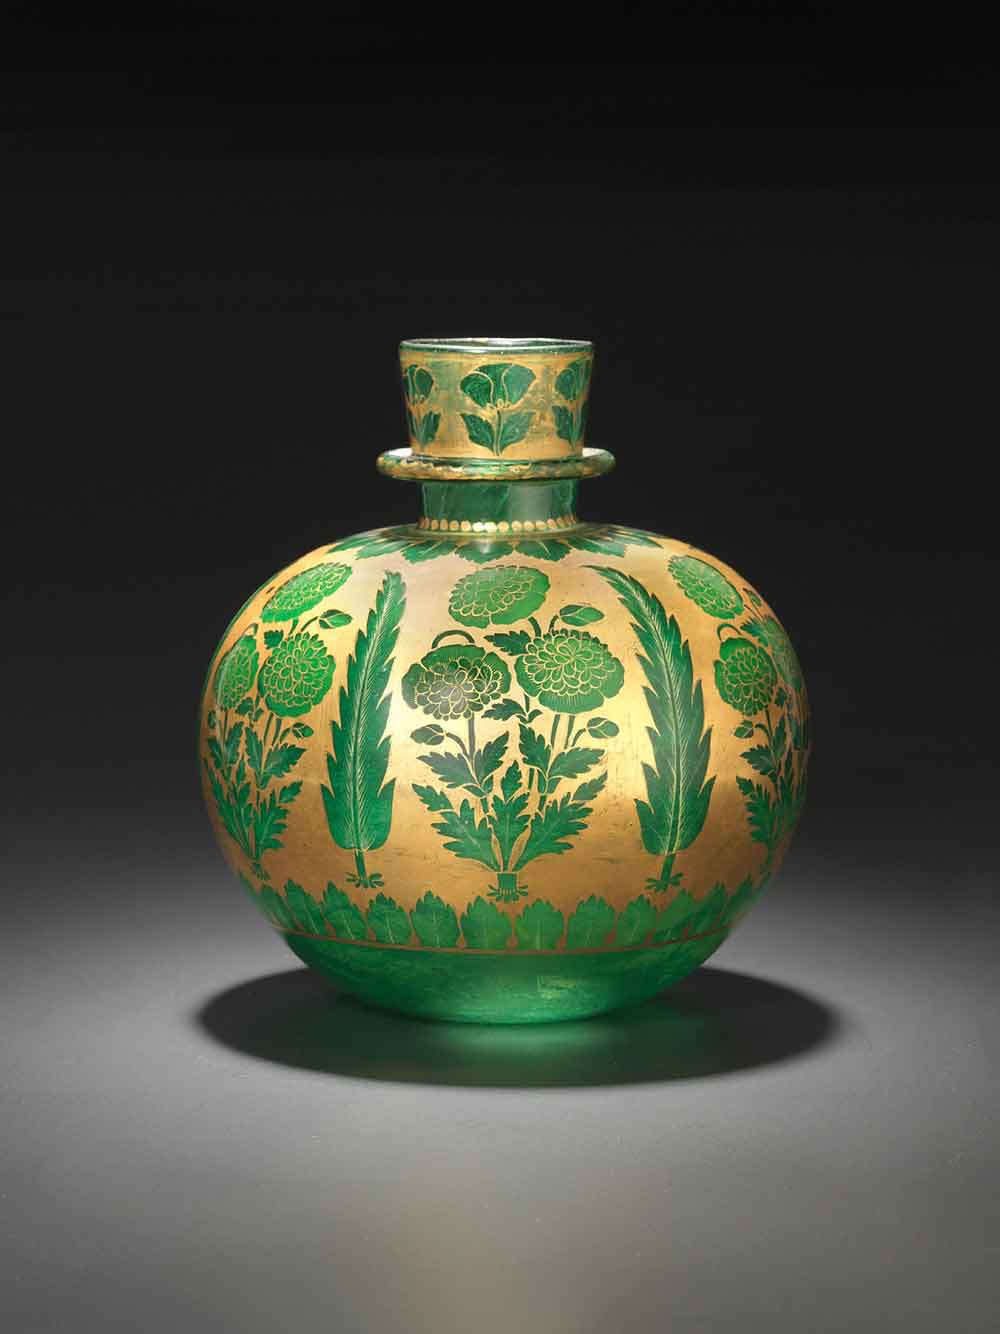 Water pipe (huqqa), green glass with poppies, India, Mughal; beginning of 18th century <br> The brilliant emerald-green glass of this water pipe is the ground color for the six poppies and six cypresses painted in reserve on a golden ground. Details are painted in gold, and inside is a layer of enamel paint to create depth in the composition. The asymmetrically arranged poppies of different kinds on the neck seem quite natural, though a little stiff. <br> Several of the Great Mughals were habitual users of opium, derived from the opium poppy, papaver somniferum. It is no coincidence that the poppy was often found as a decoration on water pipes, which could be used to smoke opium mixed with tobacco.